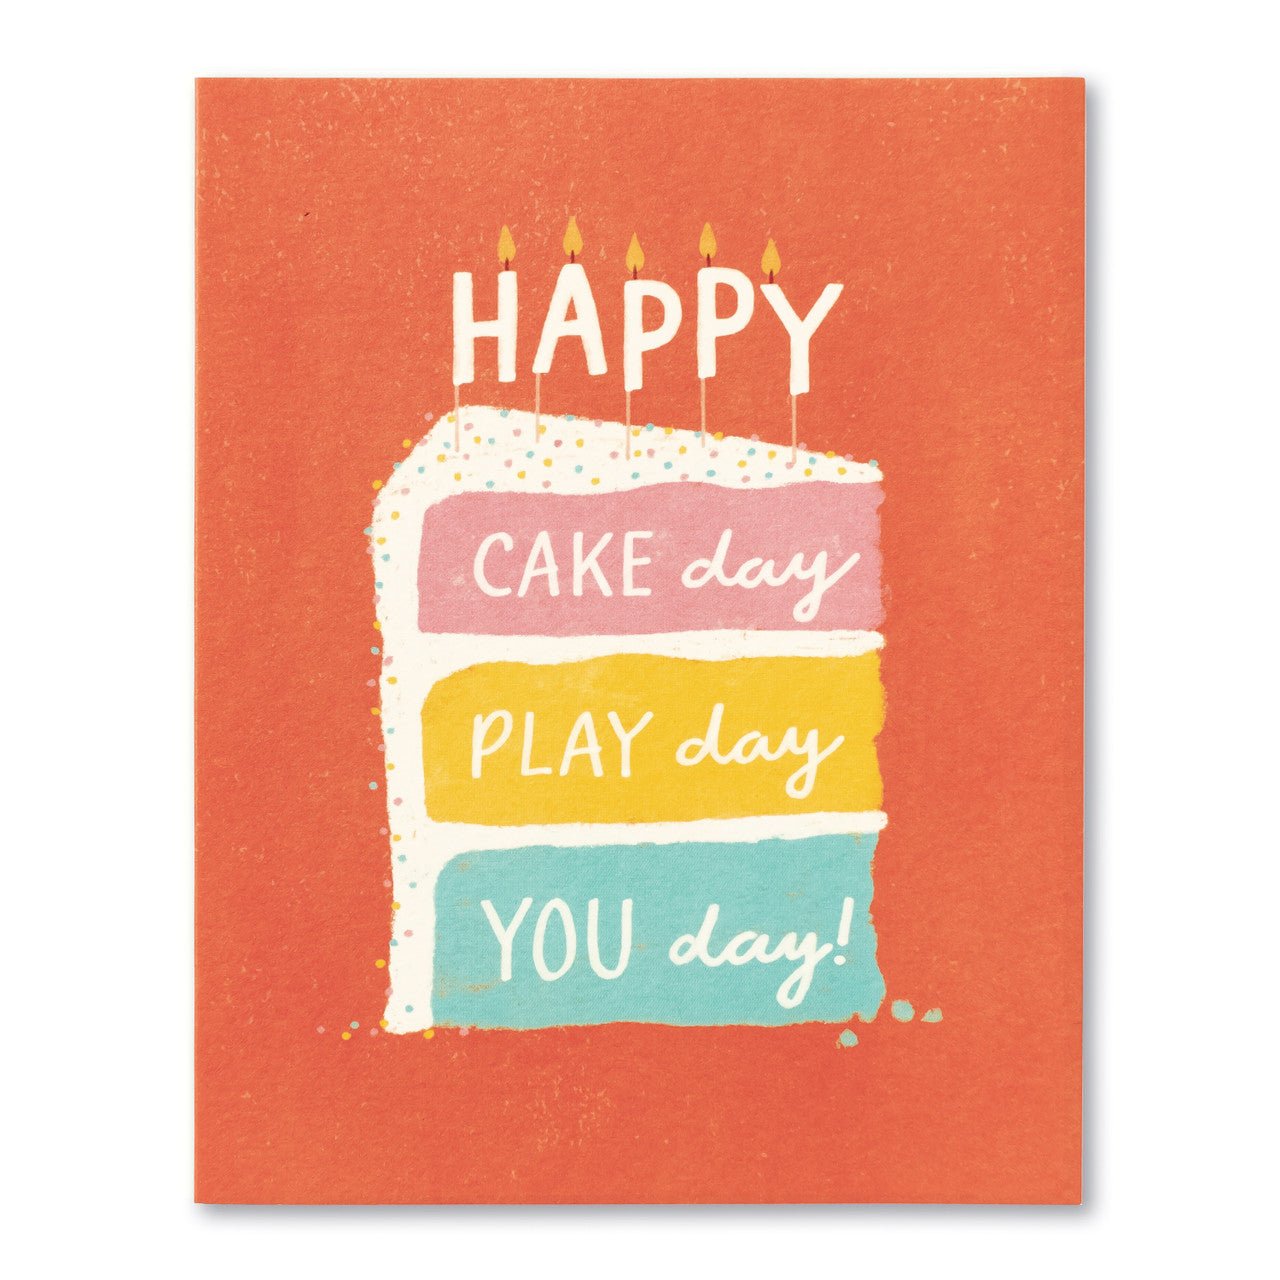 Love Muchly, (BD) Birthday Card: Happy Cake Day Play Day You Day - My Filosophy